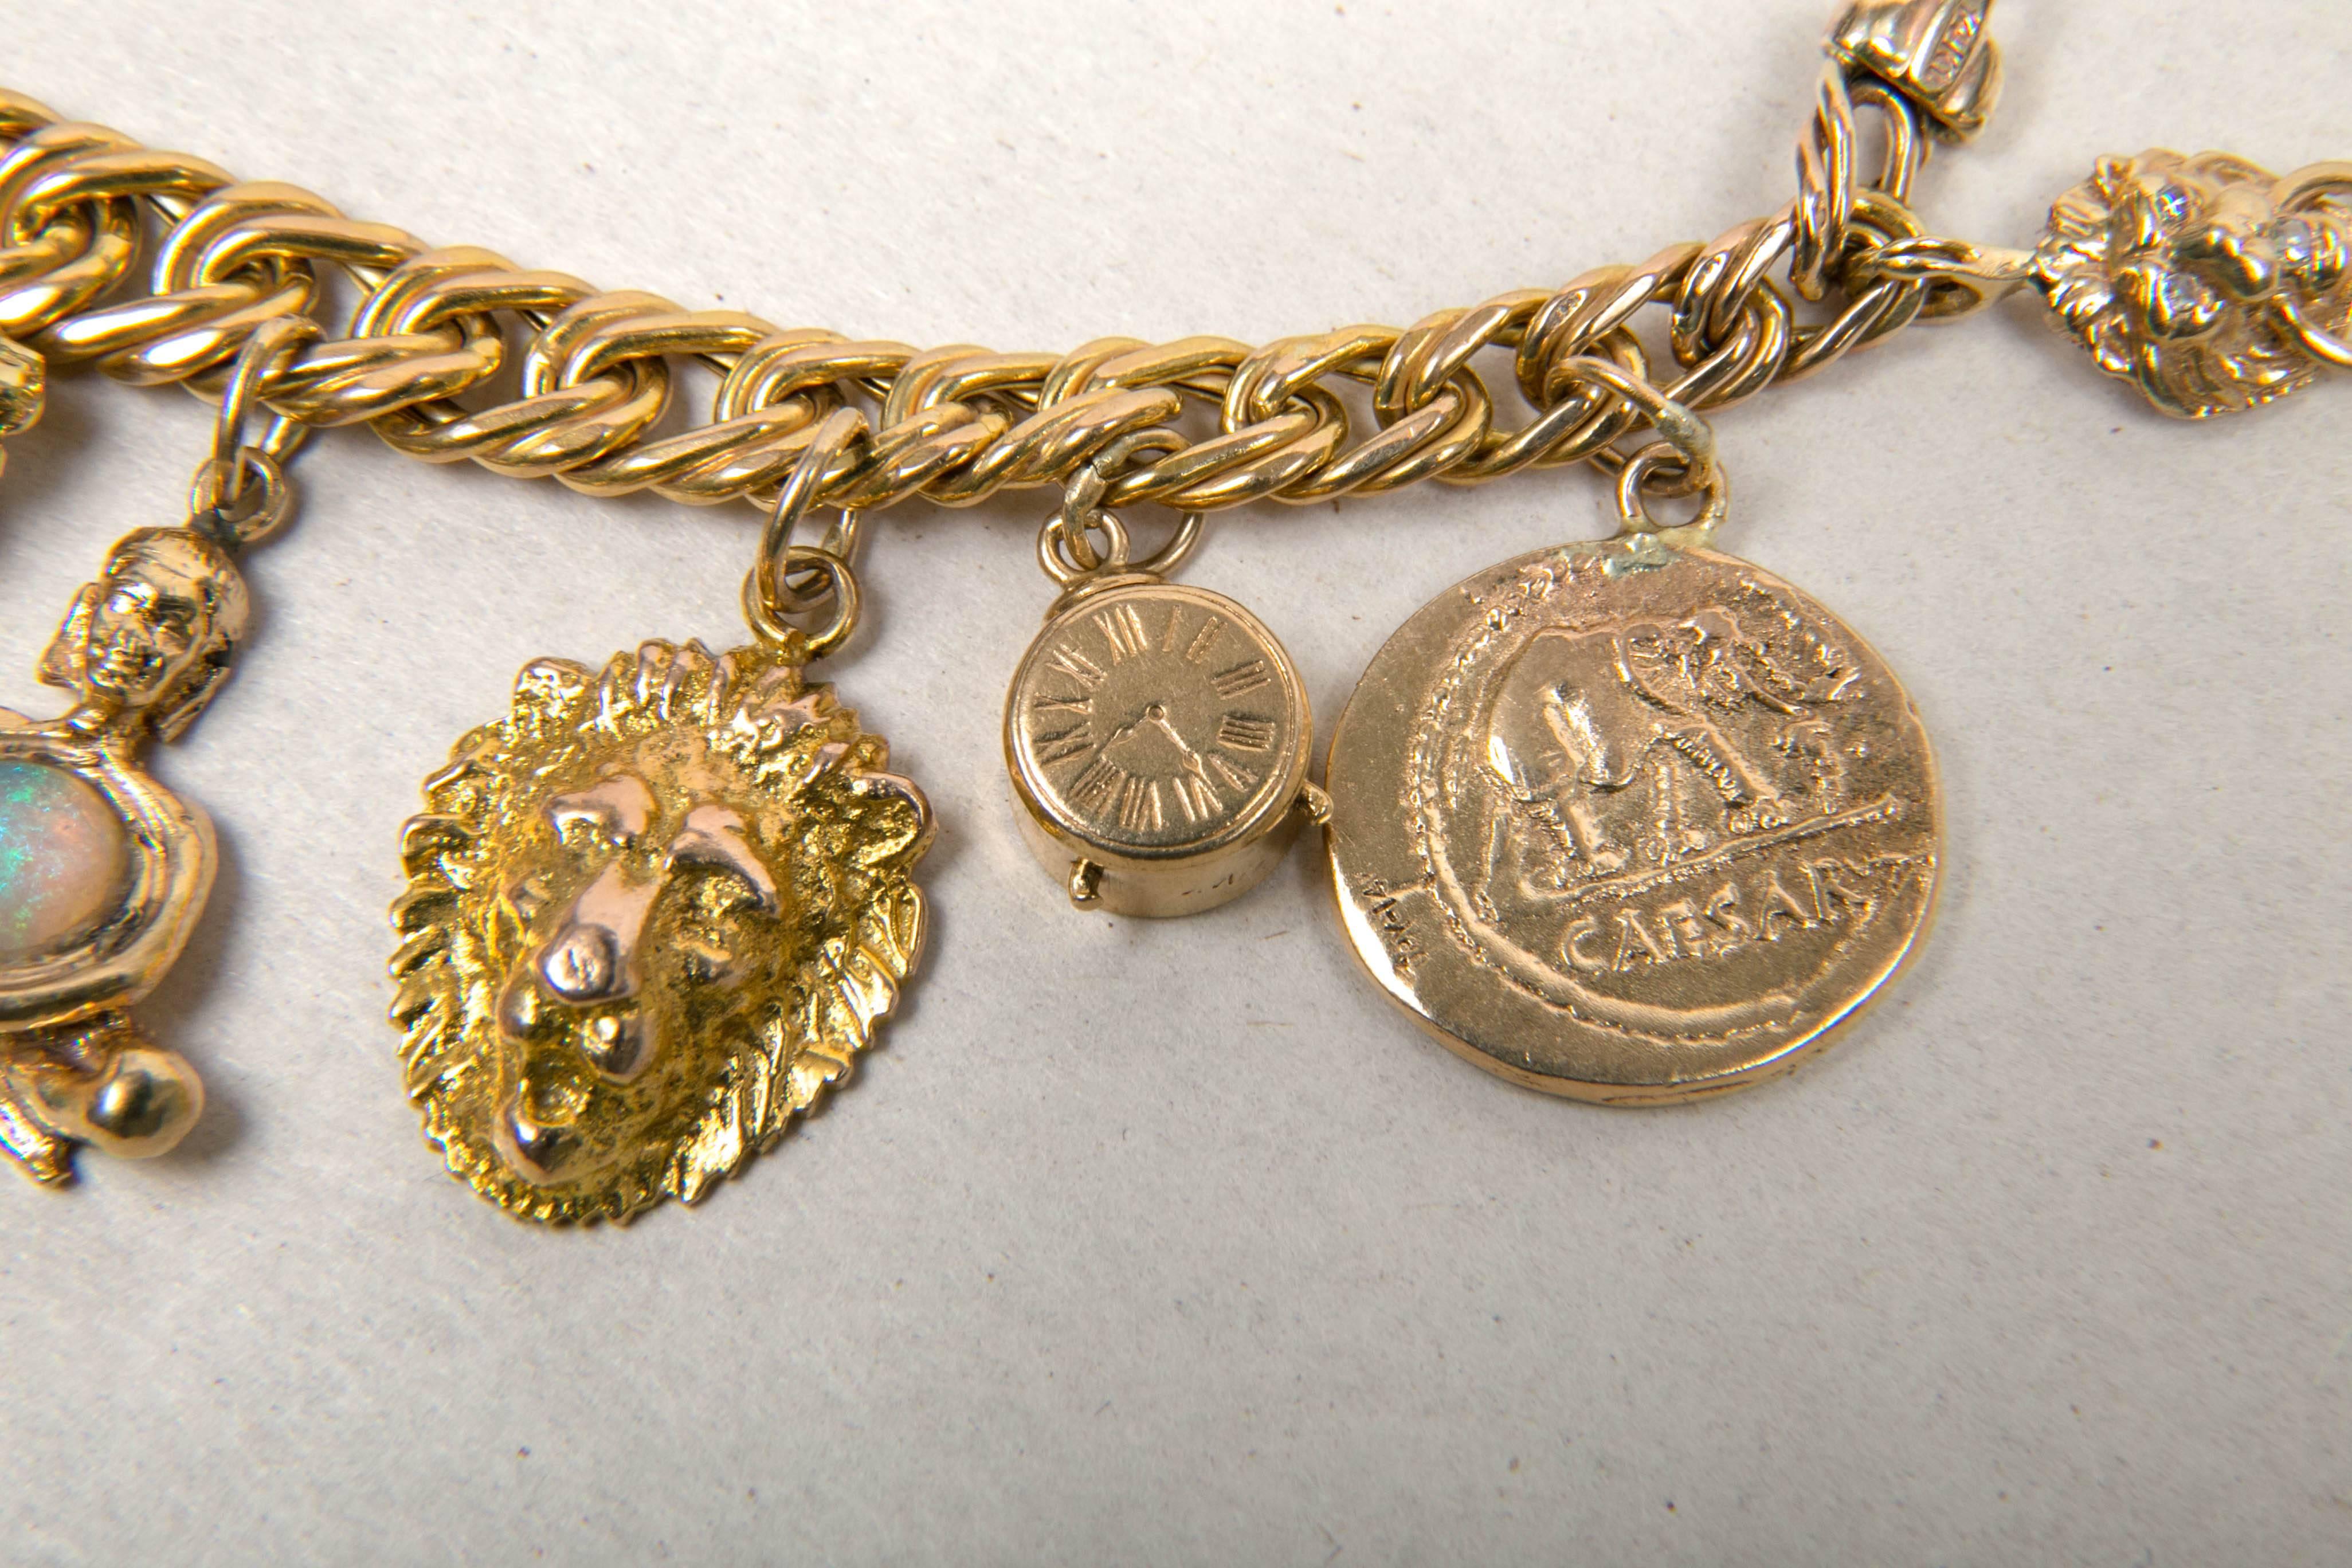 Collection charm bracelet in 14 k gold, gold round link bracelet holding 15 gold charms from 19th C through Mid Century. 